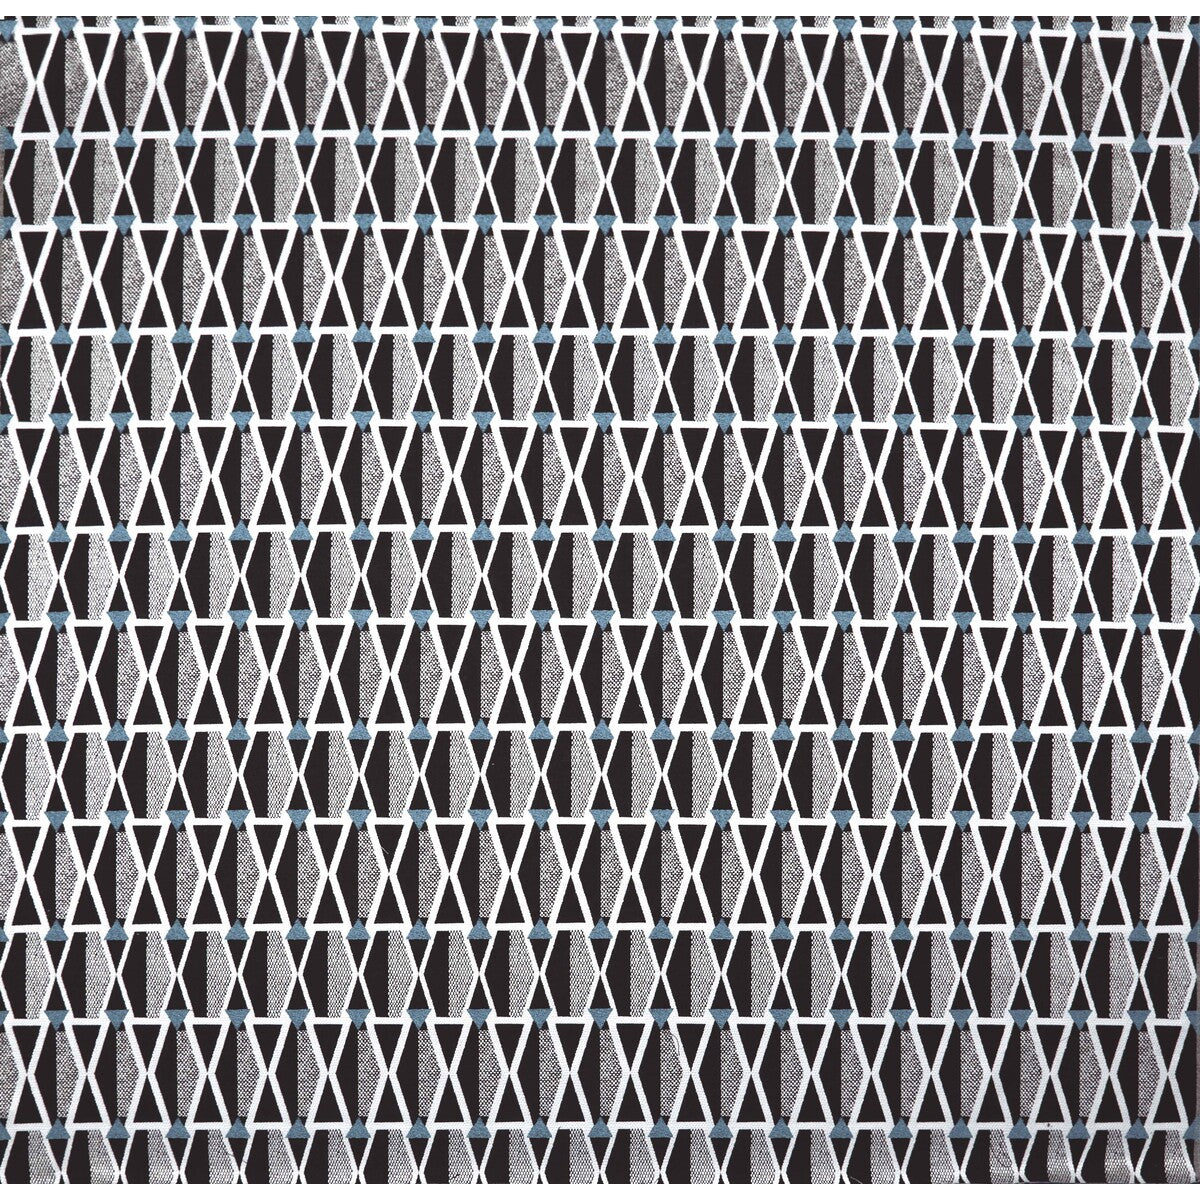 Hepburn fabric in gris color - pattern GDT5397.1.0 - by Gaston y Daniela in the Gaston Africalia collection